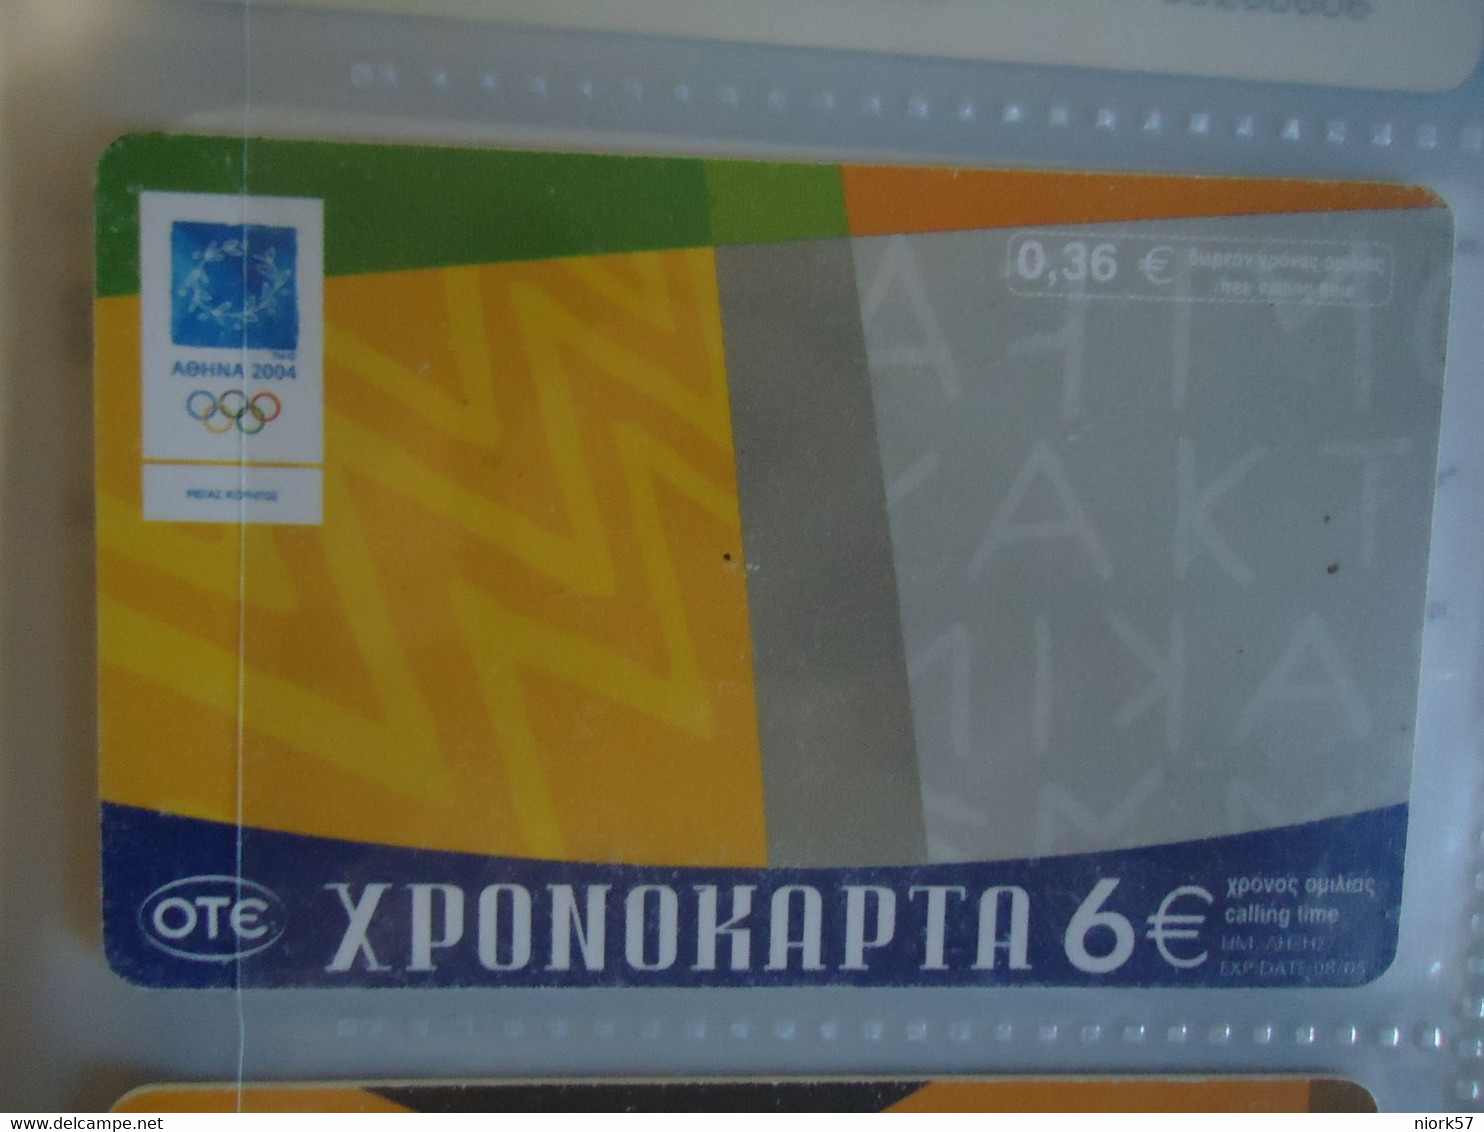 GREECE USED PREPAID CARDS SPORT OLYMPIC GAMES - Giochi Olimpici